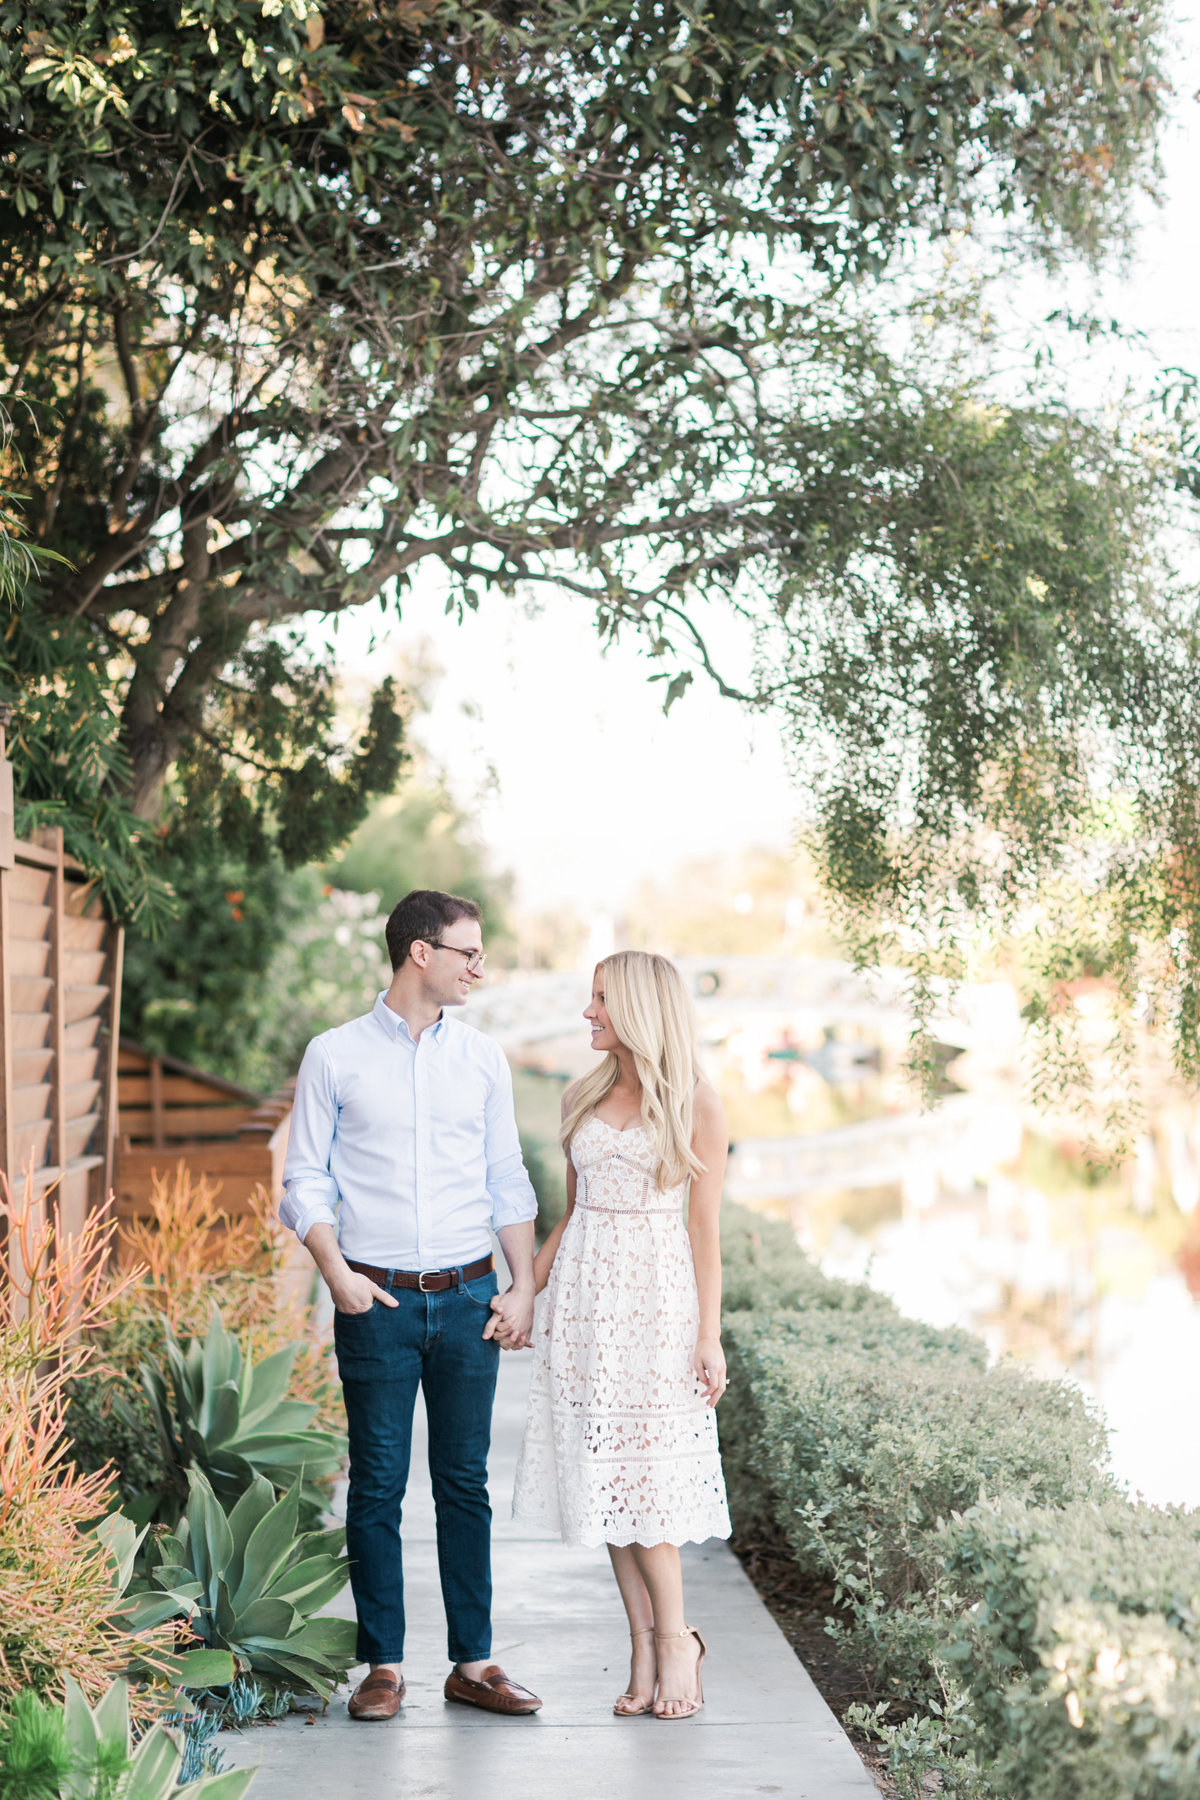 Venice Canal Beach Engagement Session_Valorie Darling Photography-6275